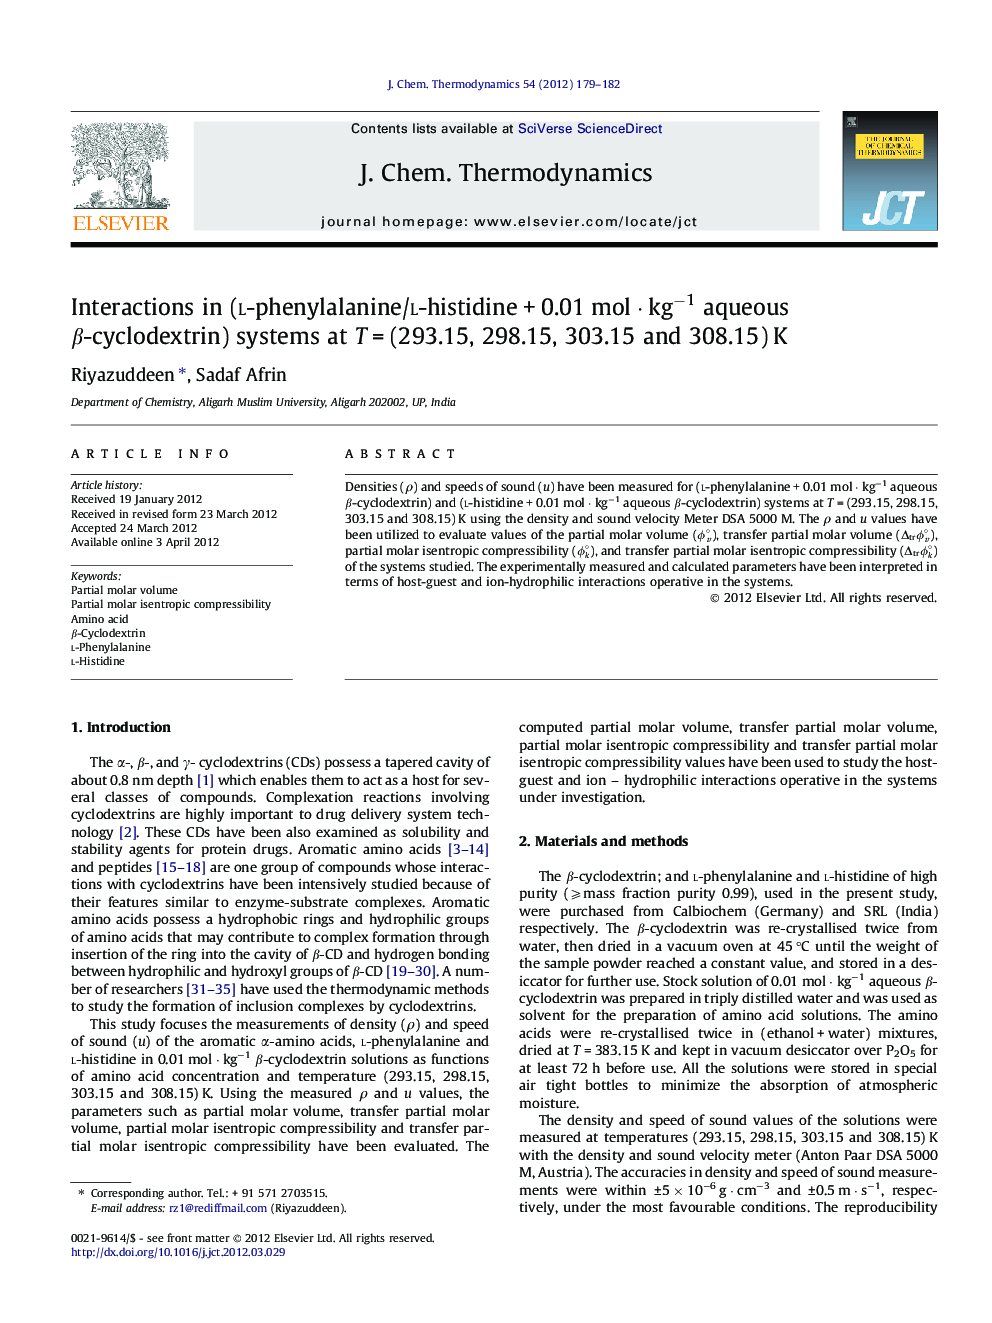 Interactions in (l-phenylalanine/l-histidine + 0.01 mol · kg−1 aqueous β-cyclodextrin) systems at T = (293.15, 298.15, 303.15 and 308.15) K